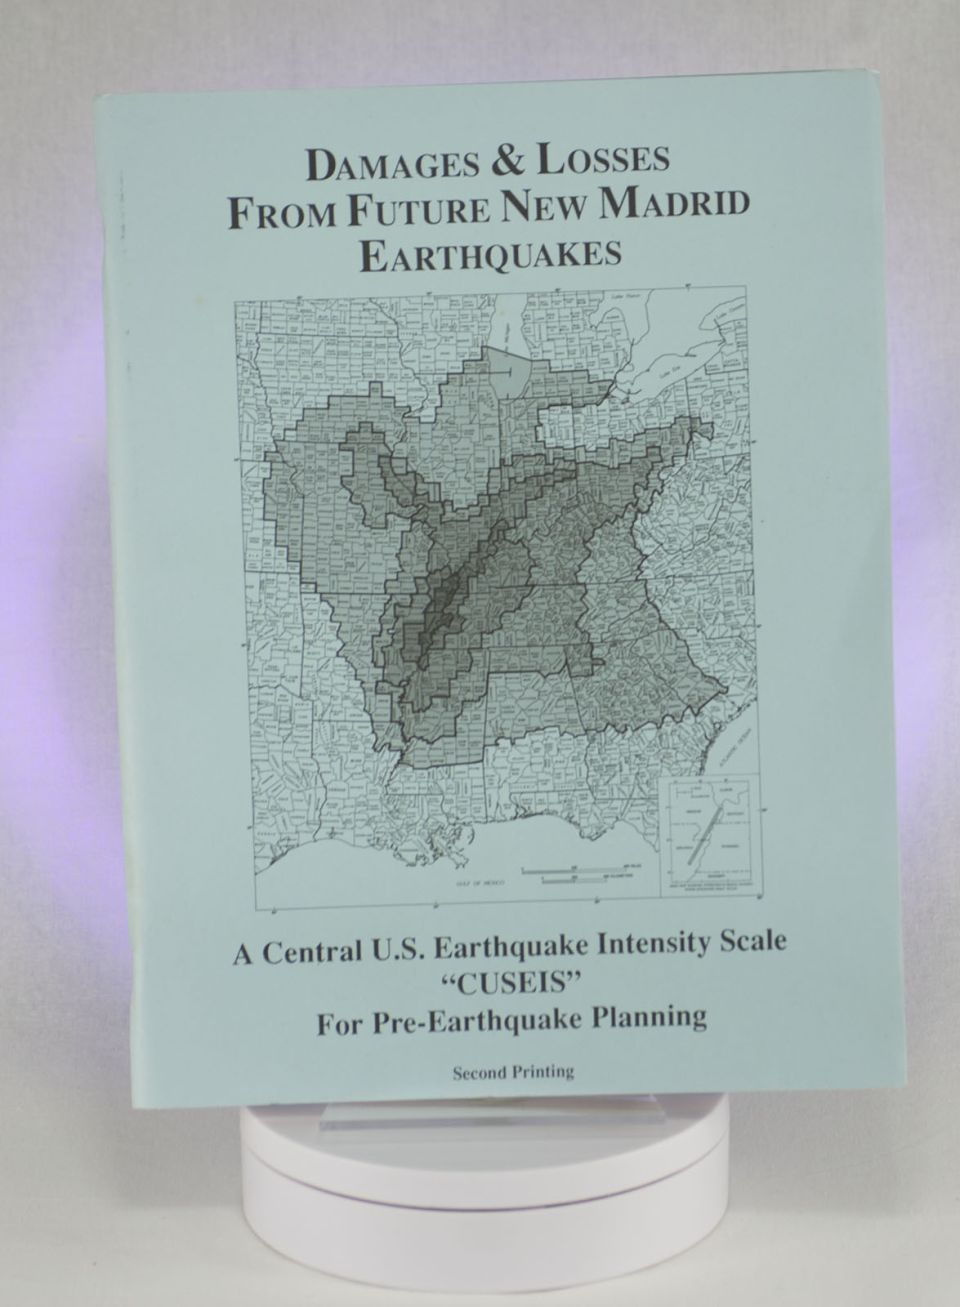 Damages and Losses From Future New Madrid Earthquakes